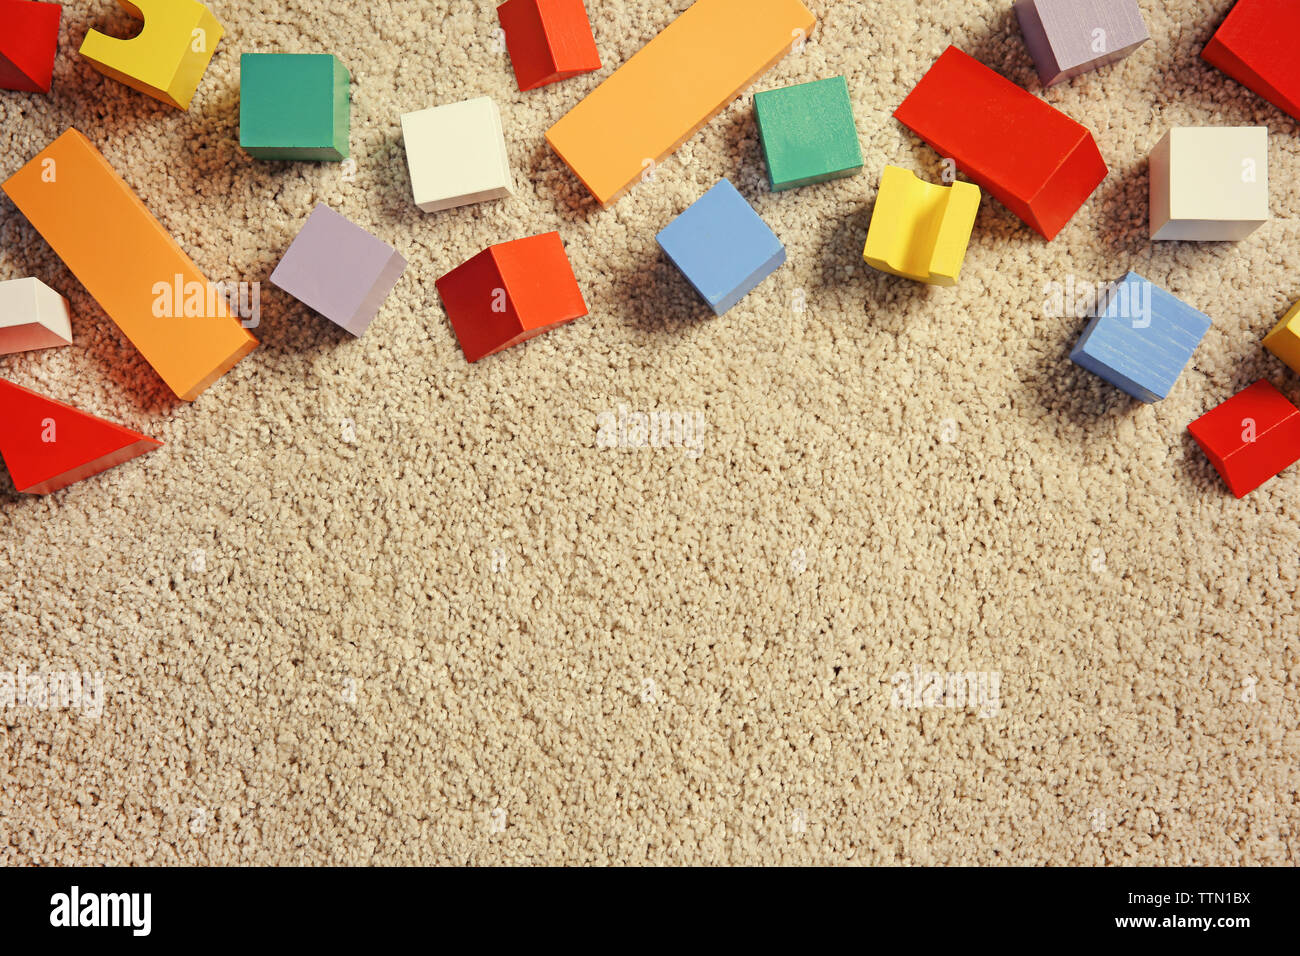 Colorful wooden building blocks for children on carpet, top view Stock Photo